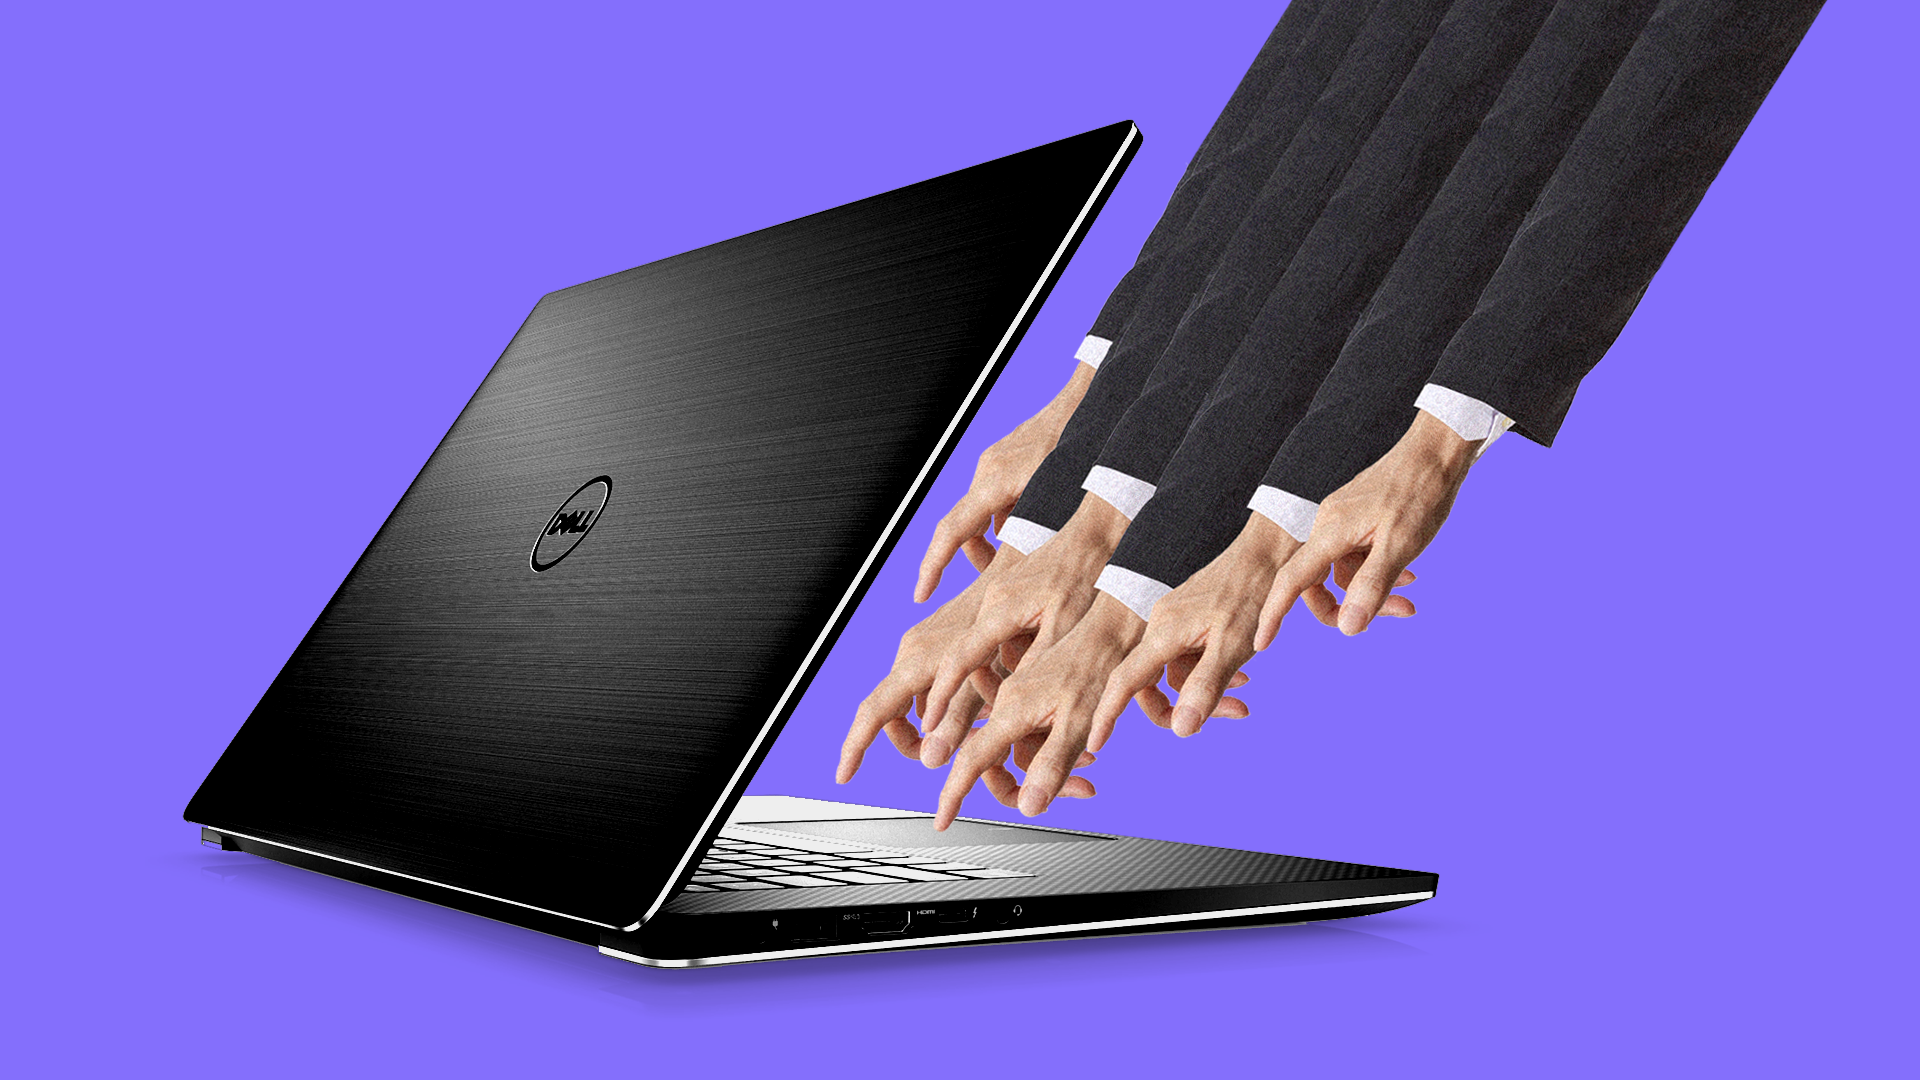 Lots of hands on a Dell keyboard